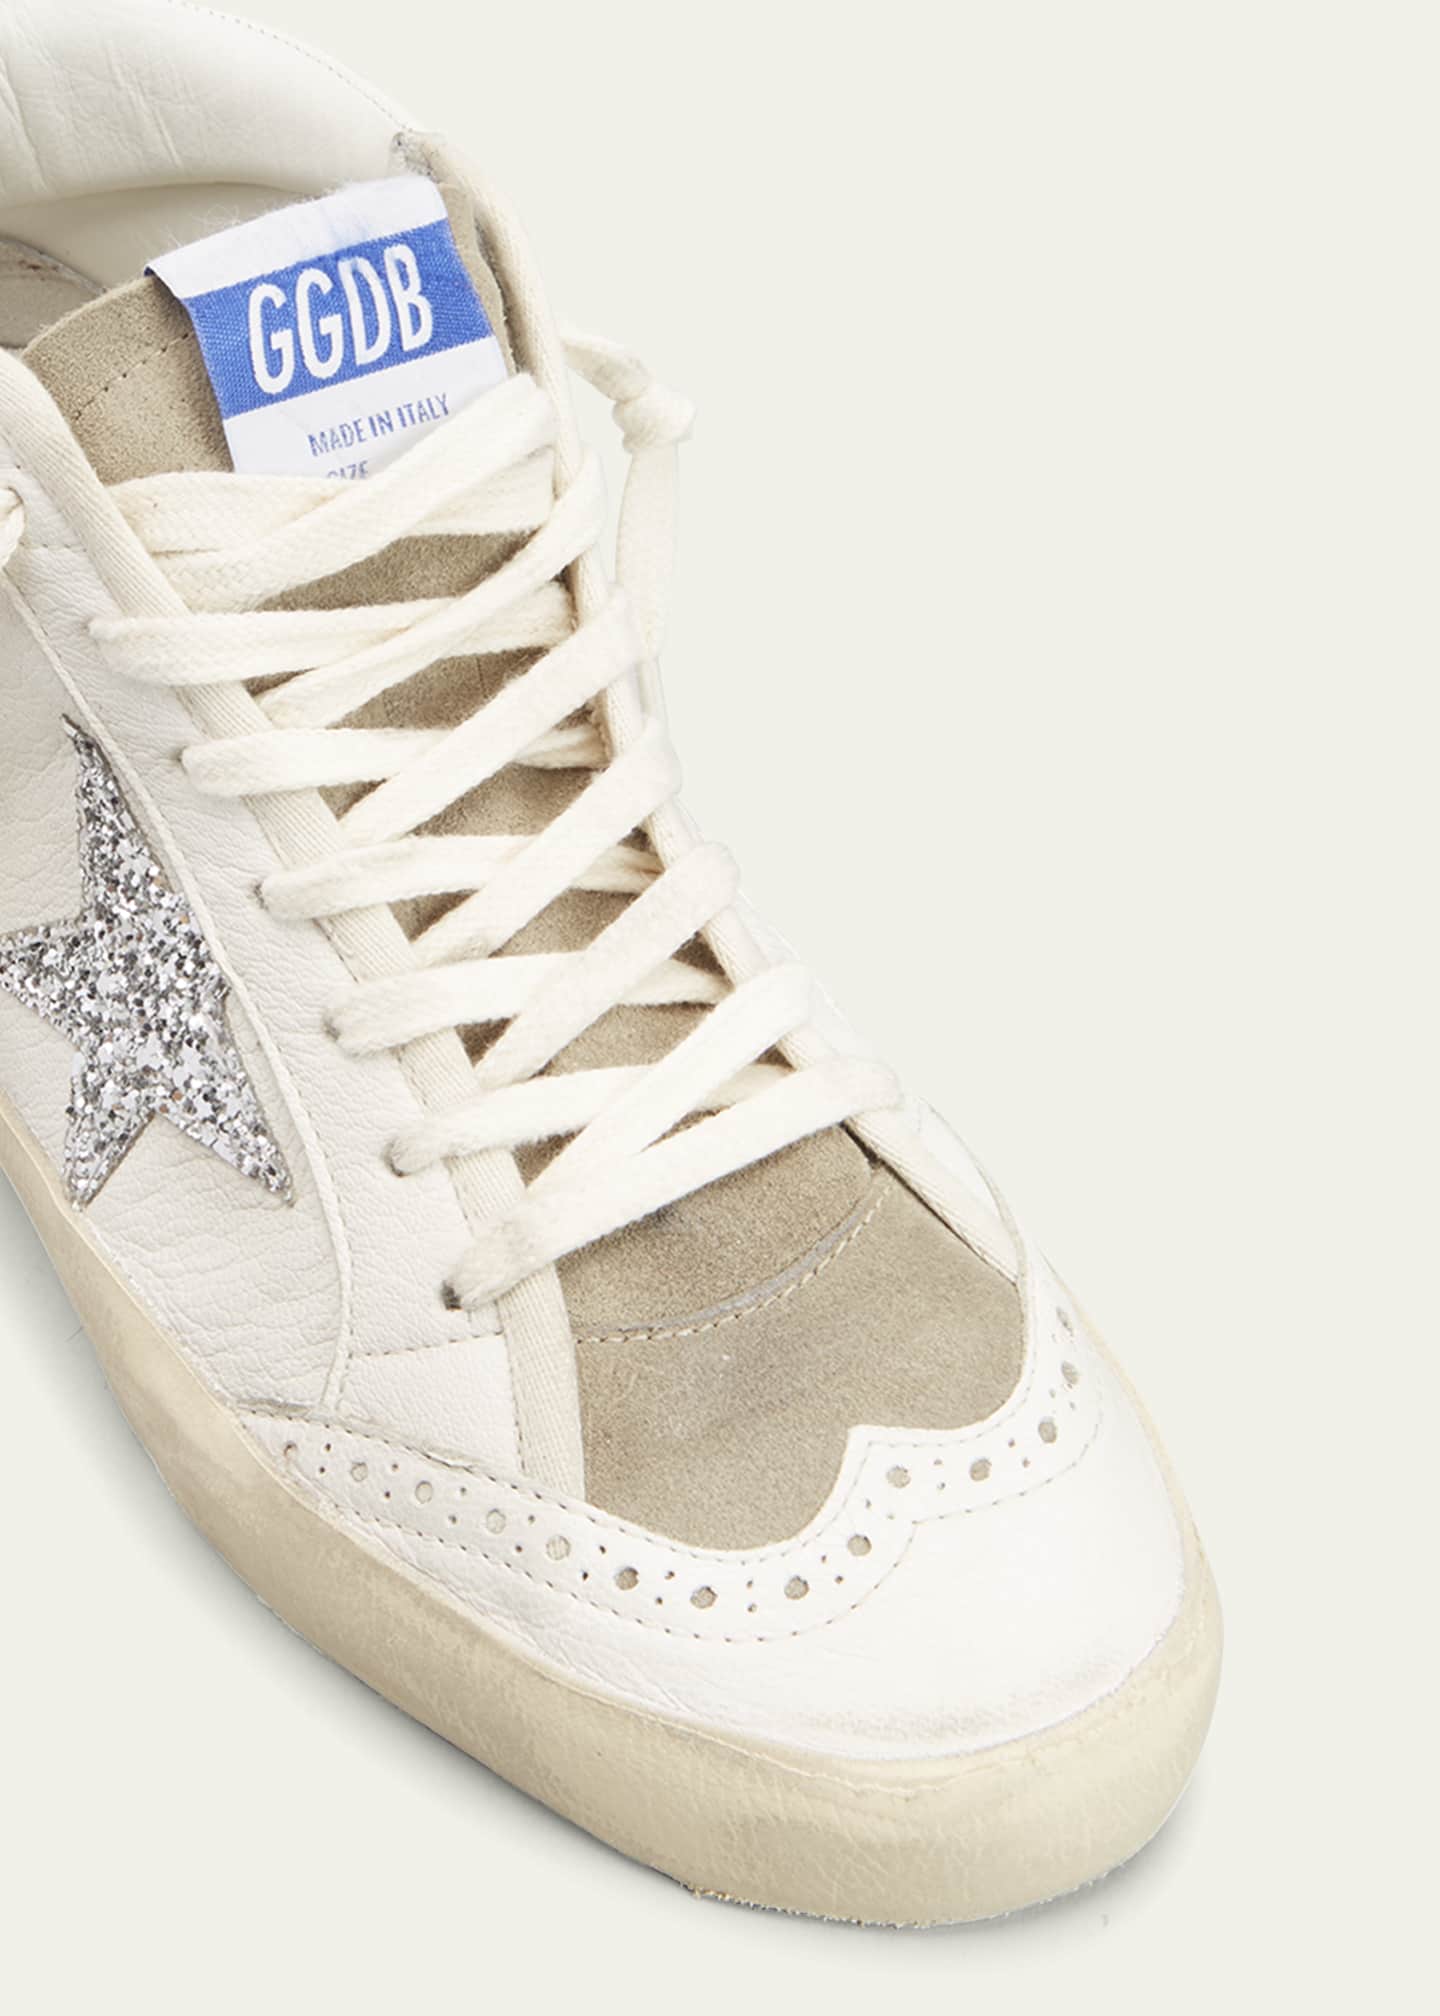 Golden Goose Mid Star Leather Glitter Wing-Tip Sneakers - Bergdorf Goodman